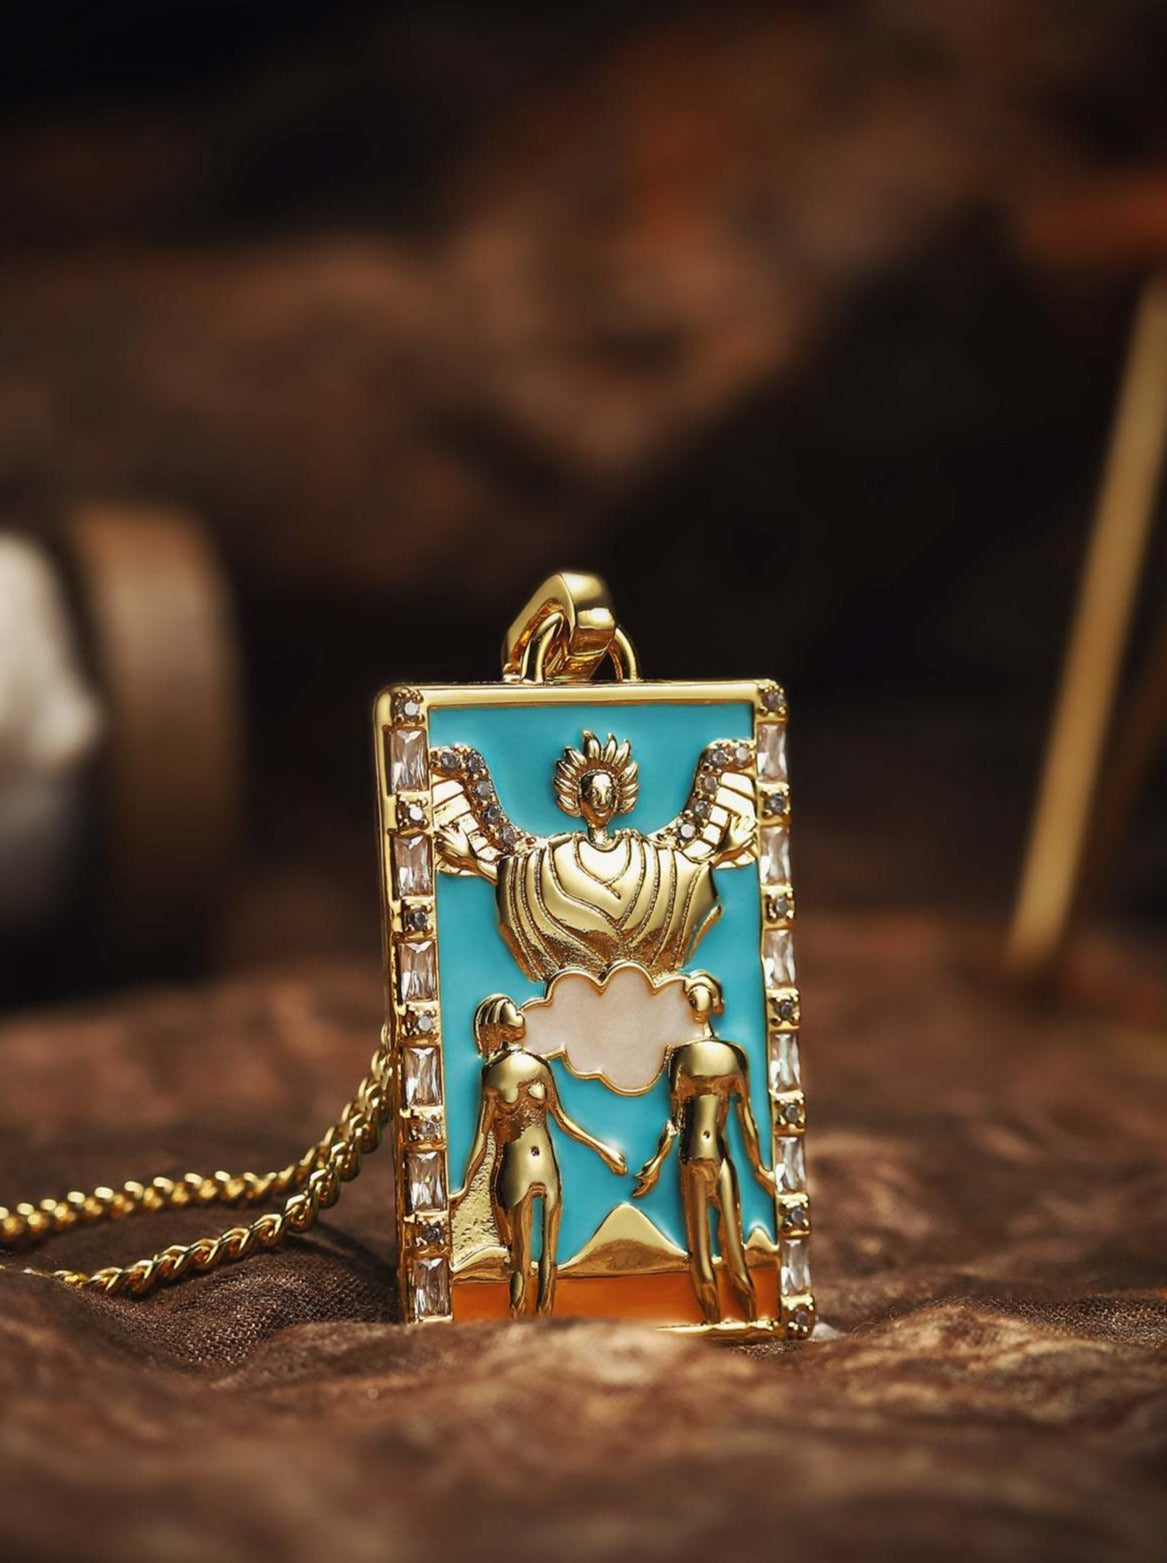 18k Gold Plated Tarot Pendant Necklace